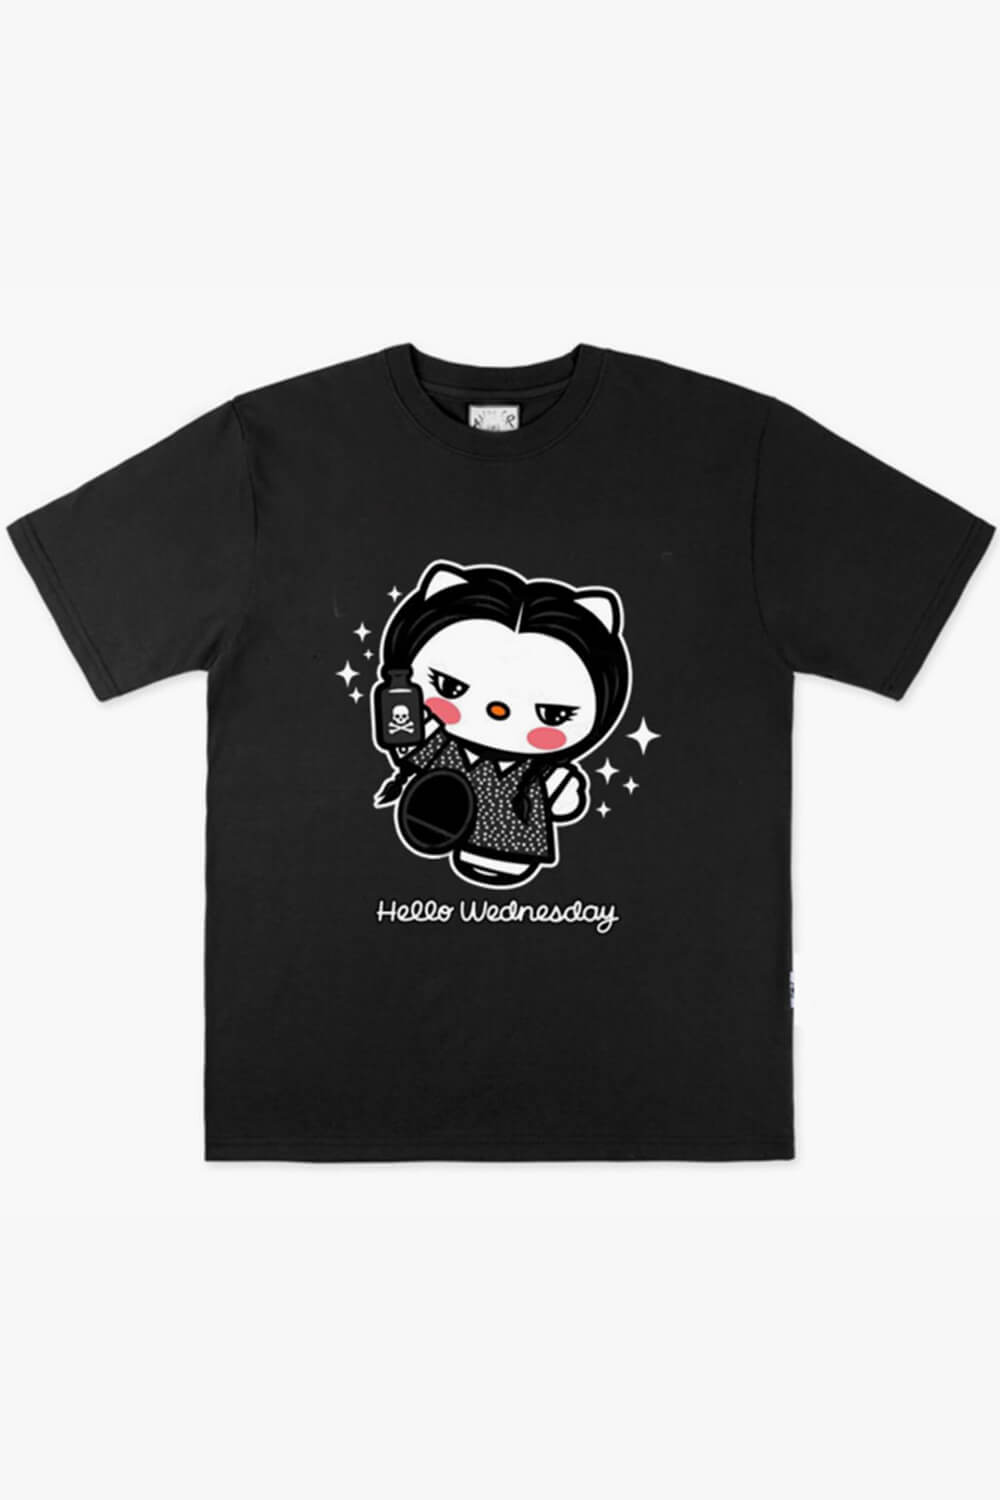 Hello Kitty Wednesday Addams T-Shirt Funny Aesthetic - AC XL / White